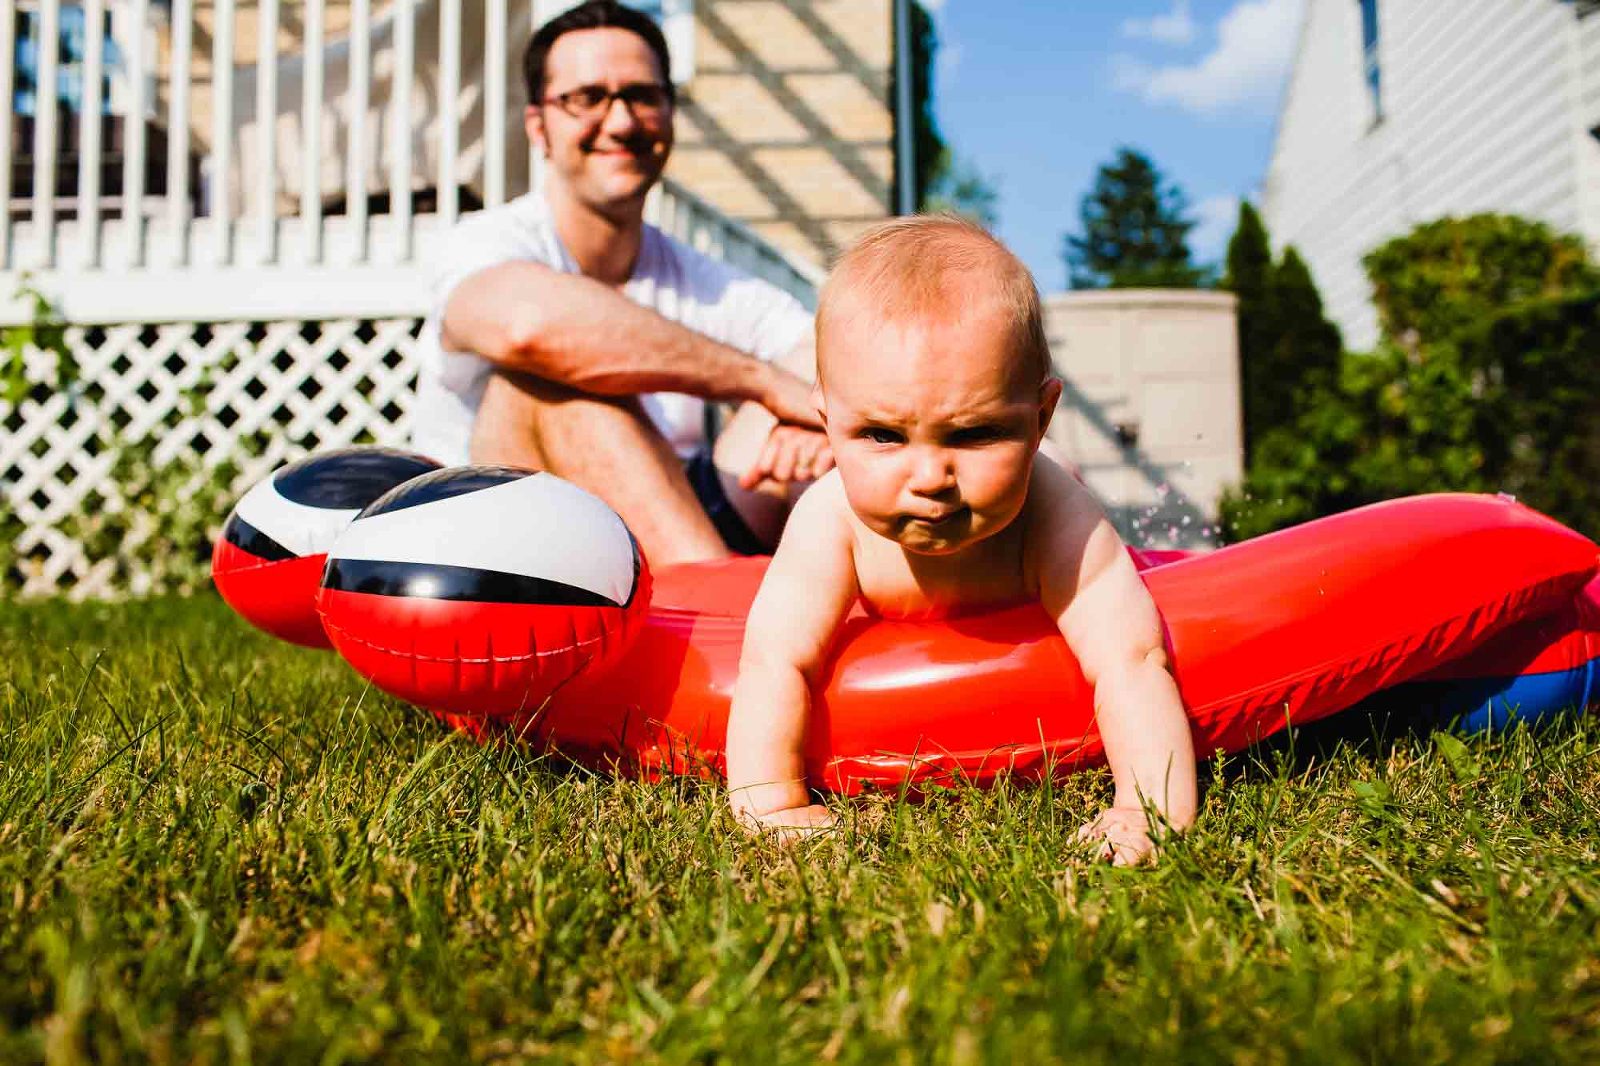 toddler climbs out of red backyard blow up pool, with disgruntled expression, and dad laughing behind him